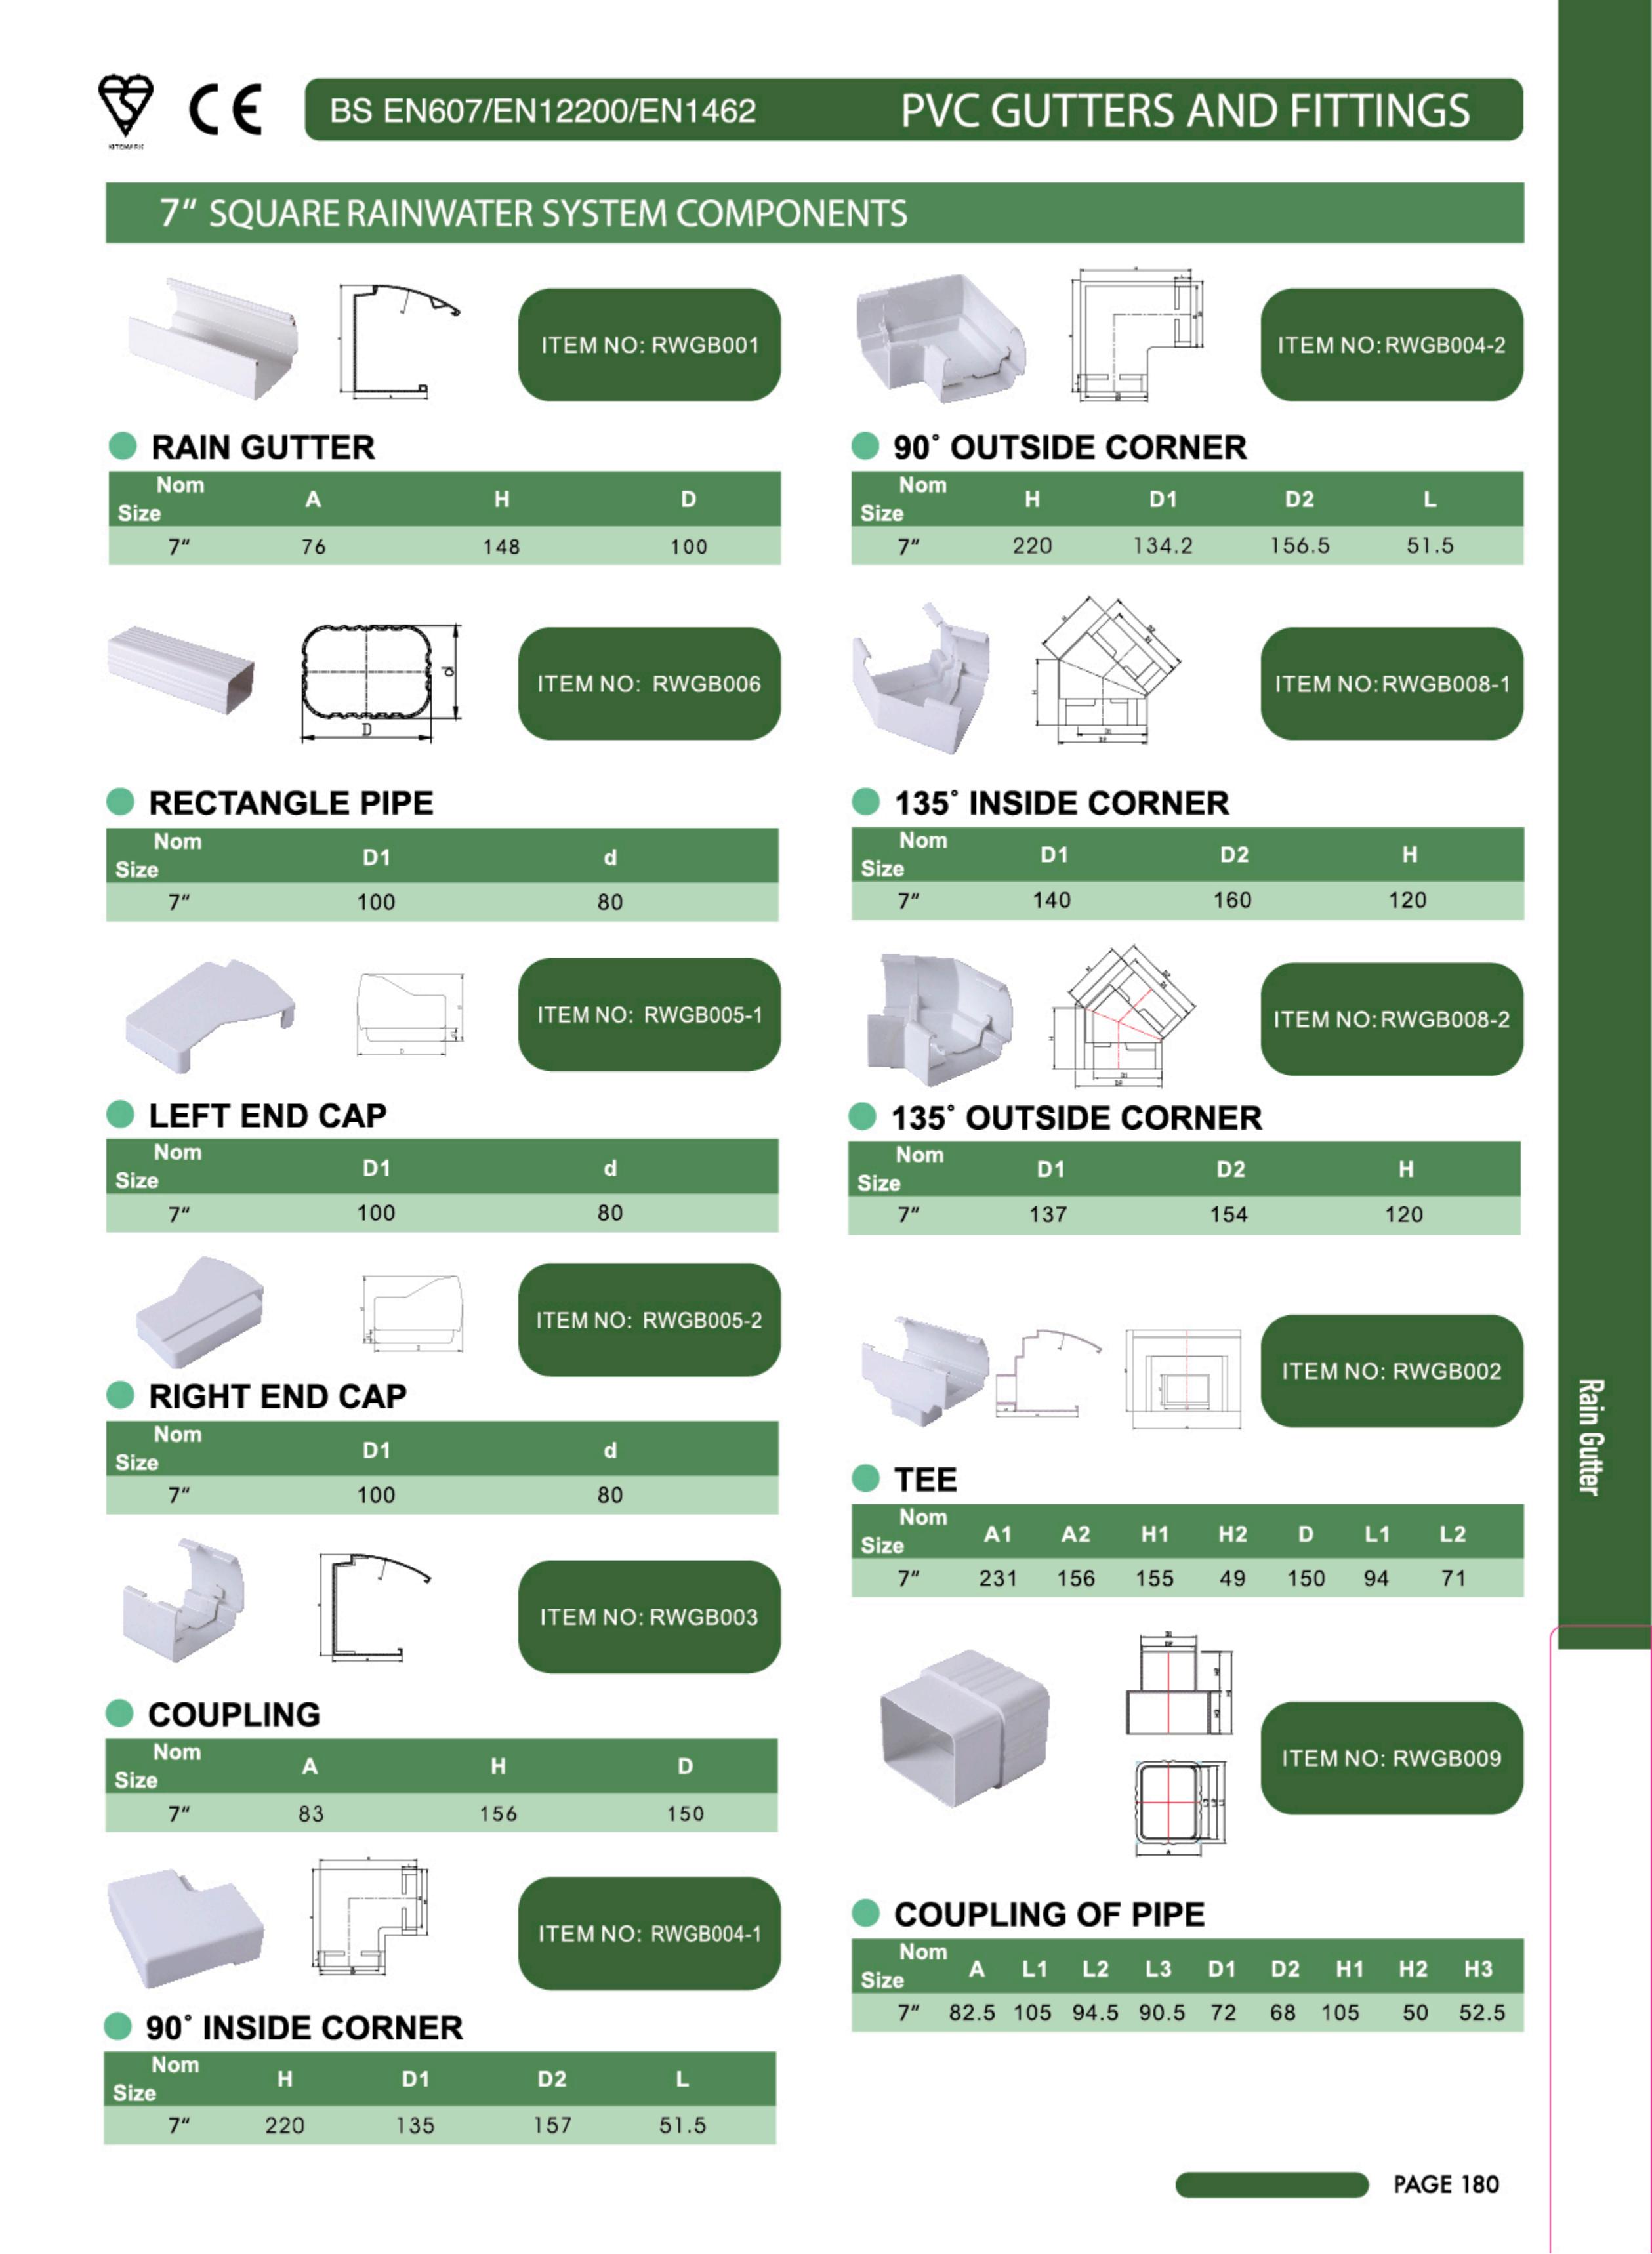 PVC GUTTERS AND FITTINGS